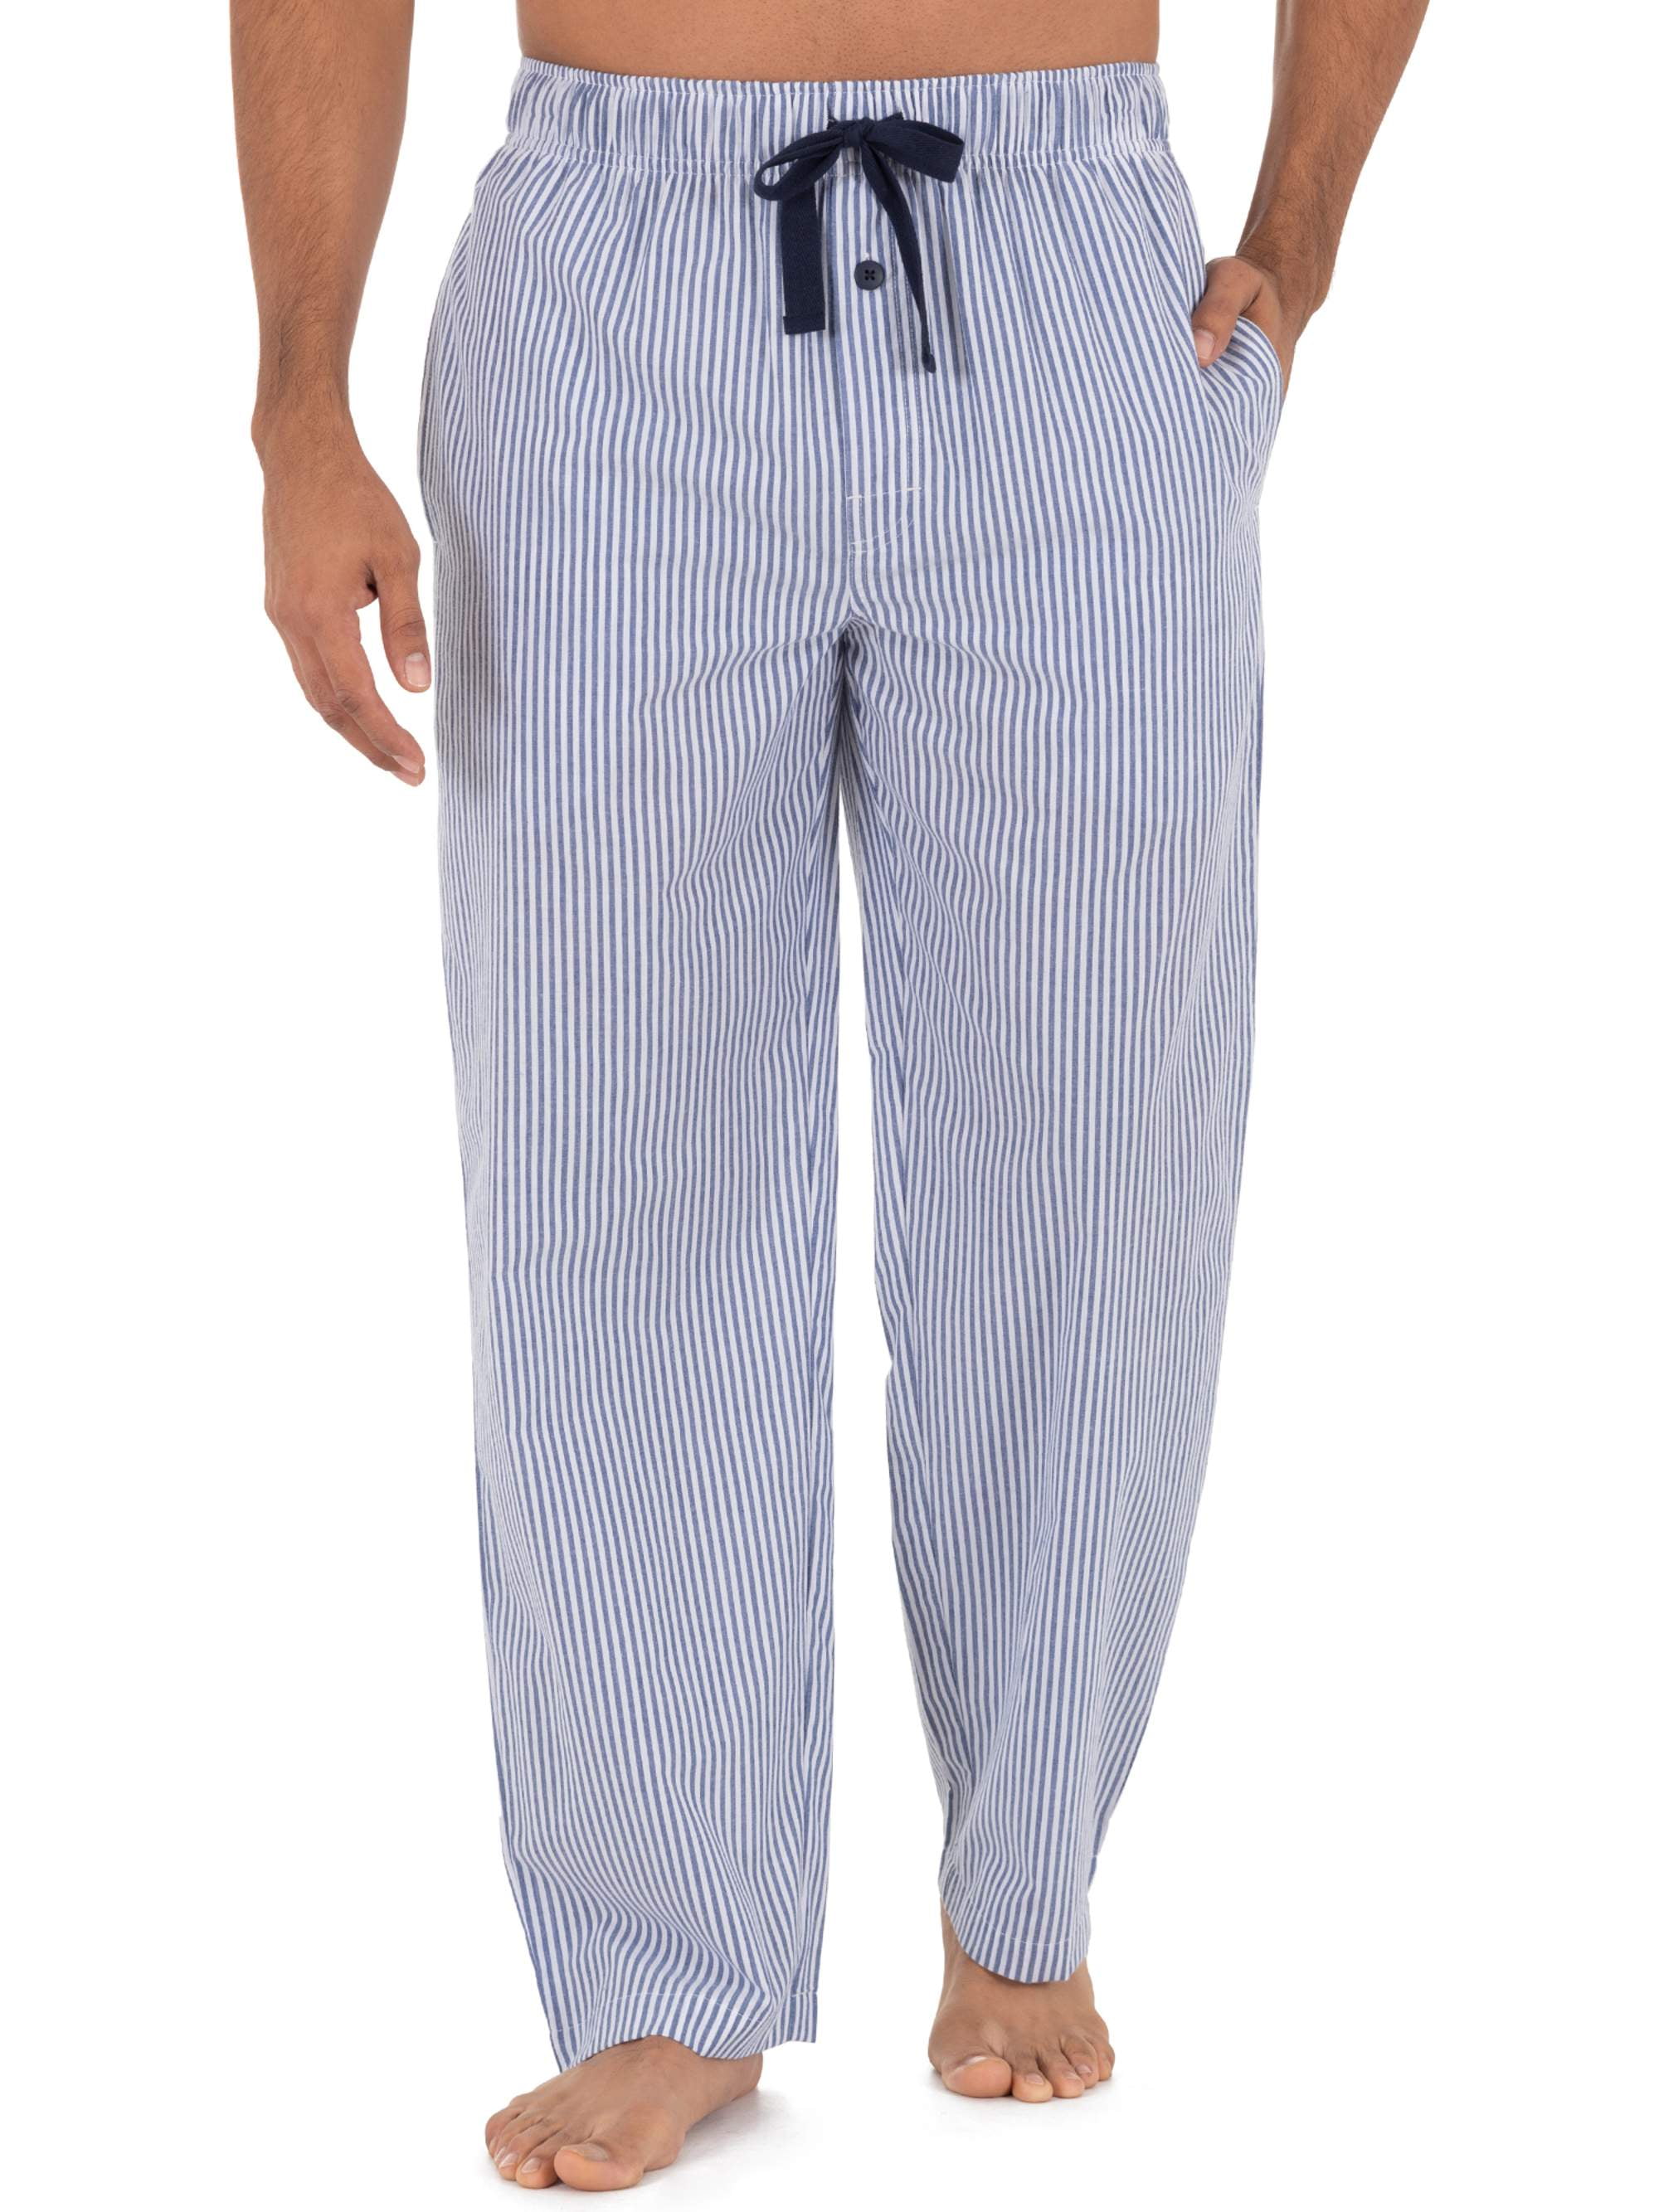 Fruit of the Loom Men's and Big Men's Microsanded Woven Plaid Pajama Pants, Sizes S-6XL & LT-3XLT - image 5 of 5